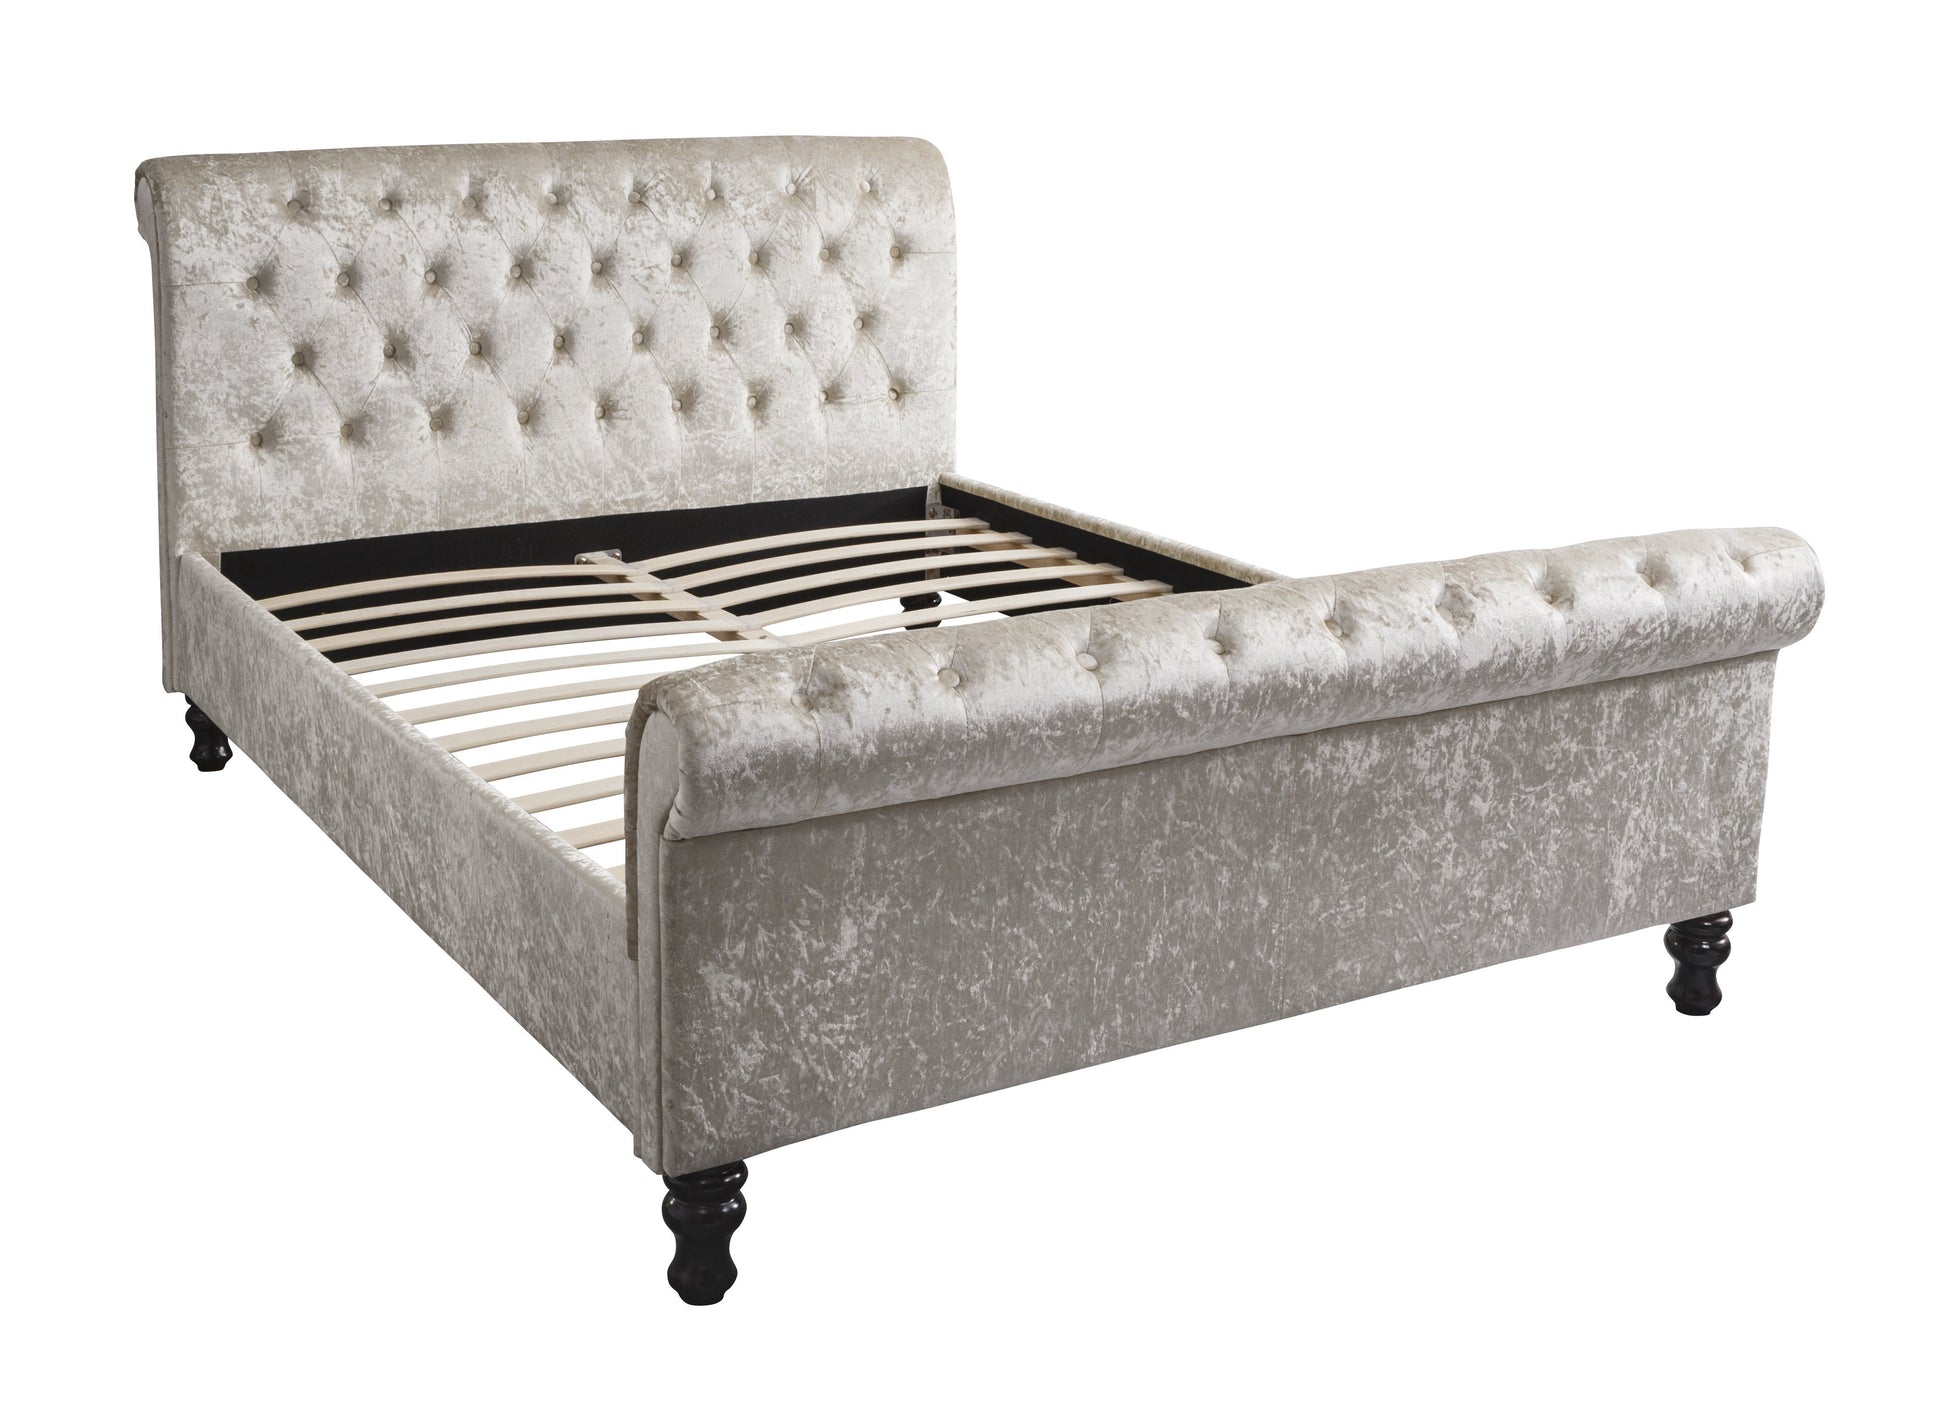 King Size Crushed Velvet Sleigh Bed and mattress set - Champagne - Laura James